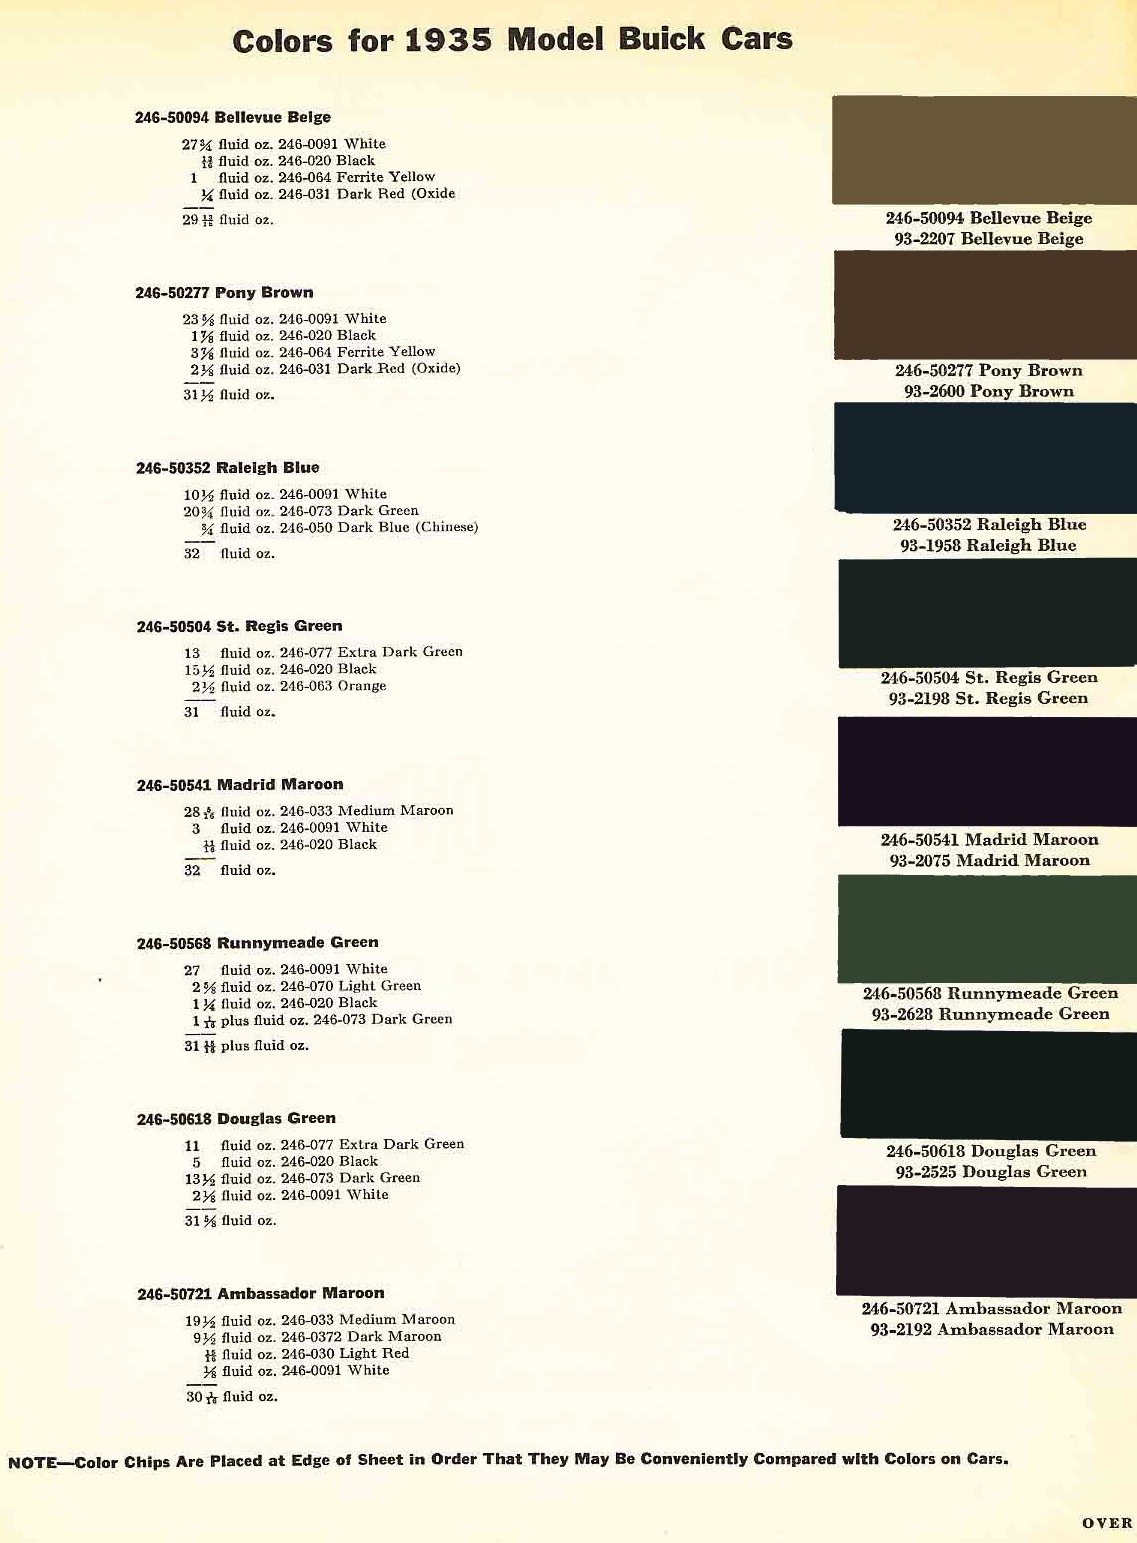 Color codes and Paint Swatches used on Buick in 1935